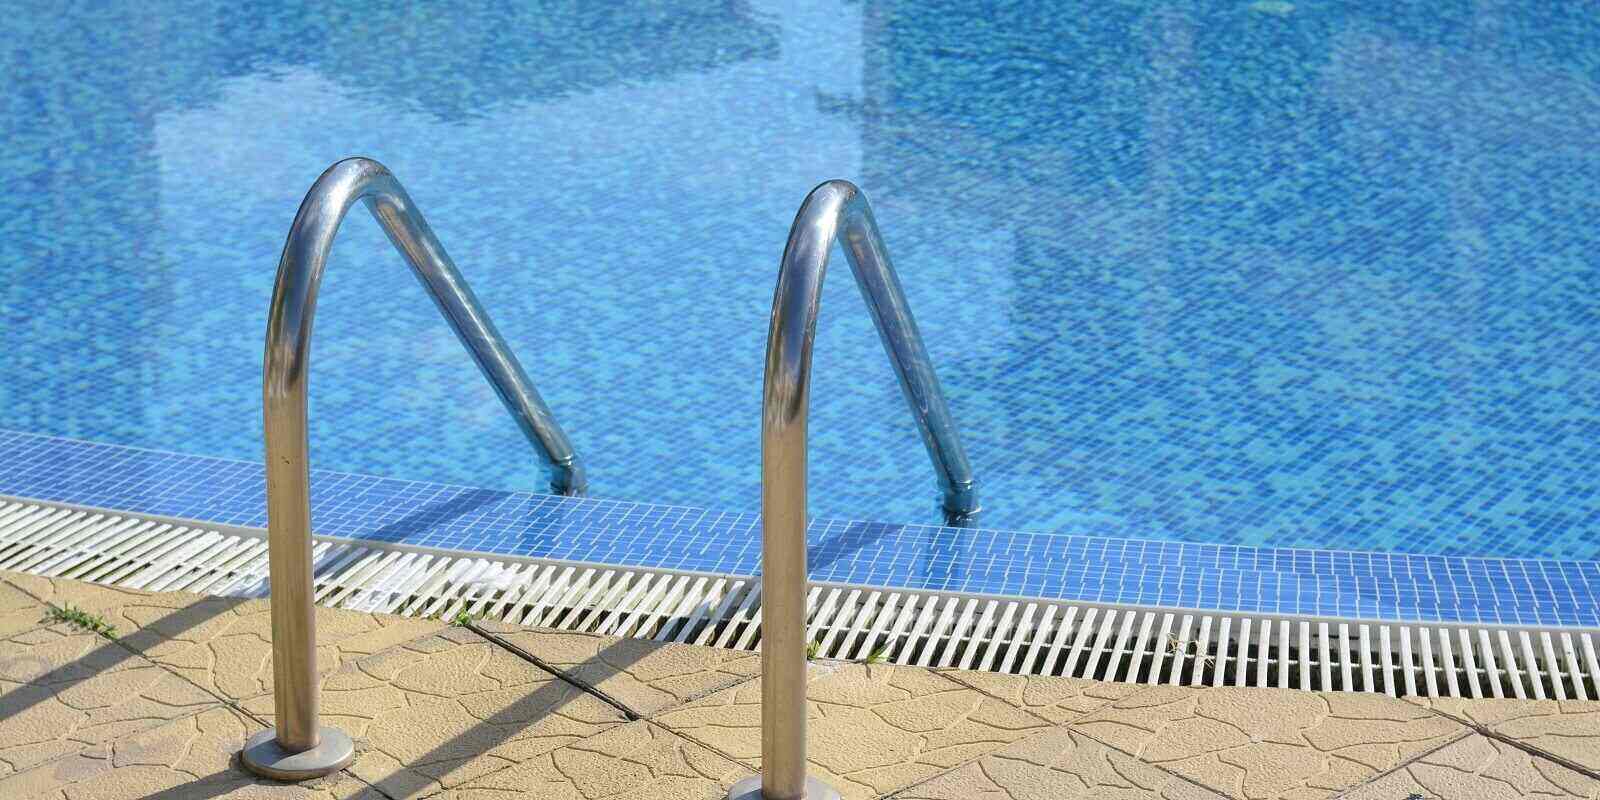 swimming pool with ladder and handrails on sunny day